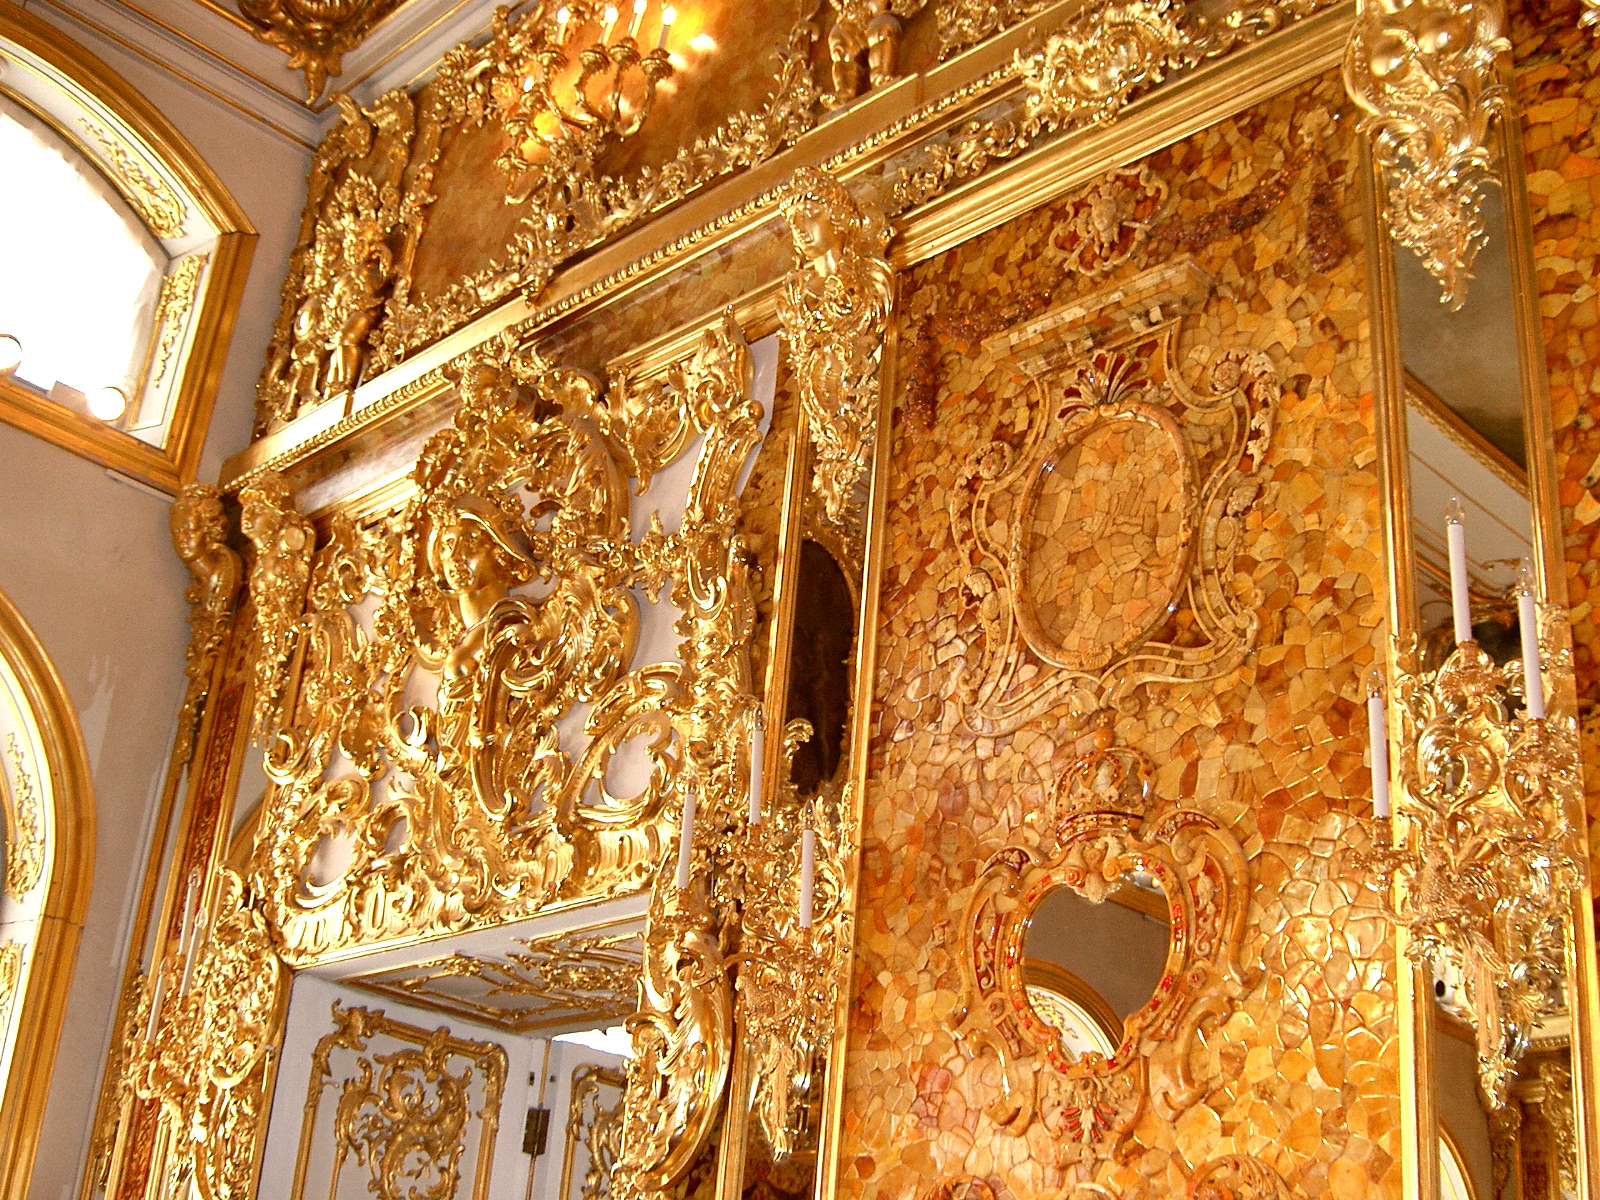 Interior shot of the Amber Room, by jeanyfan on Wikimedia Commons - Own work, Public Domain